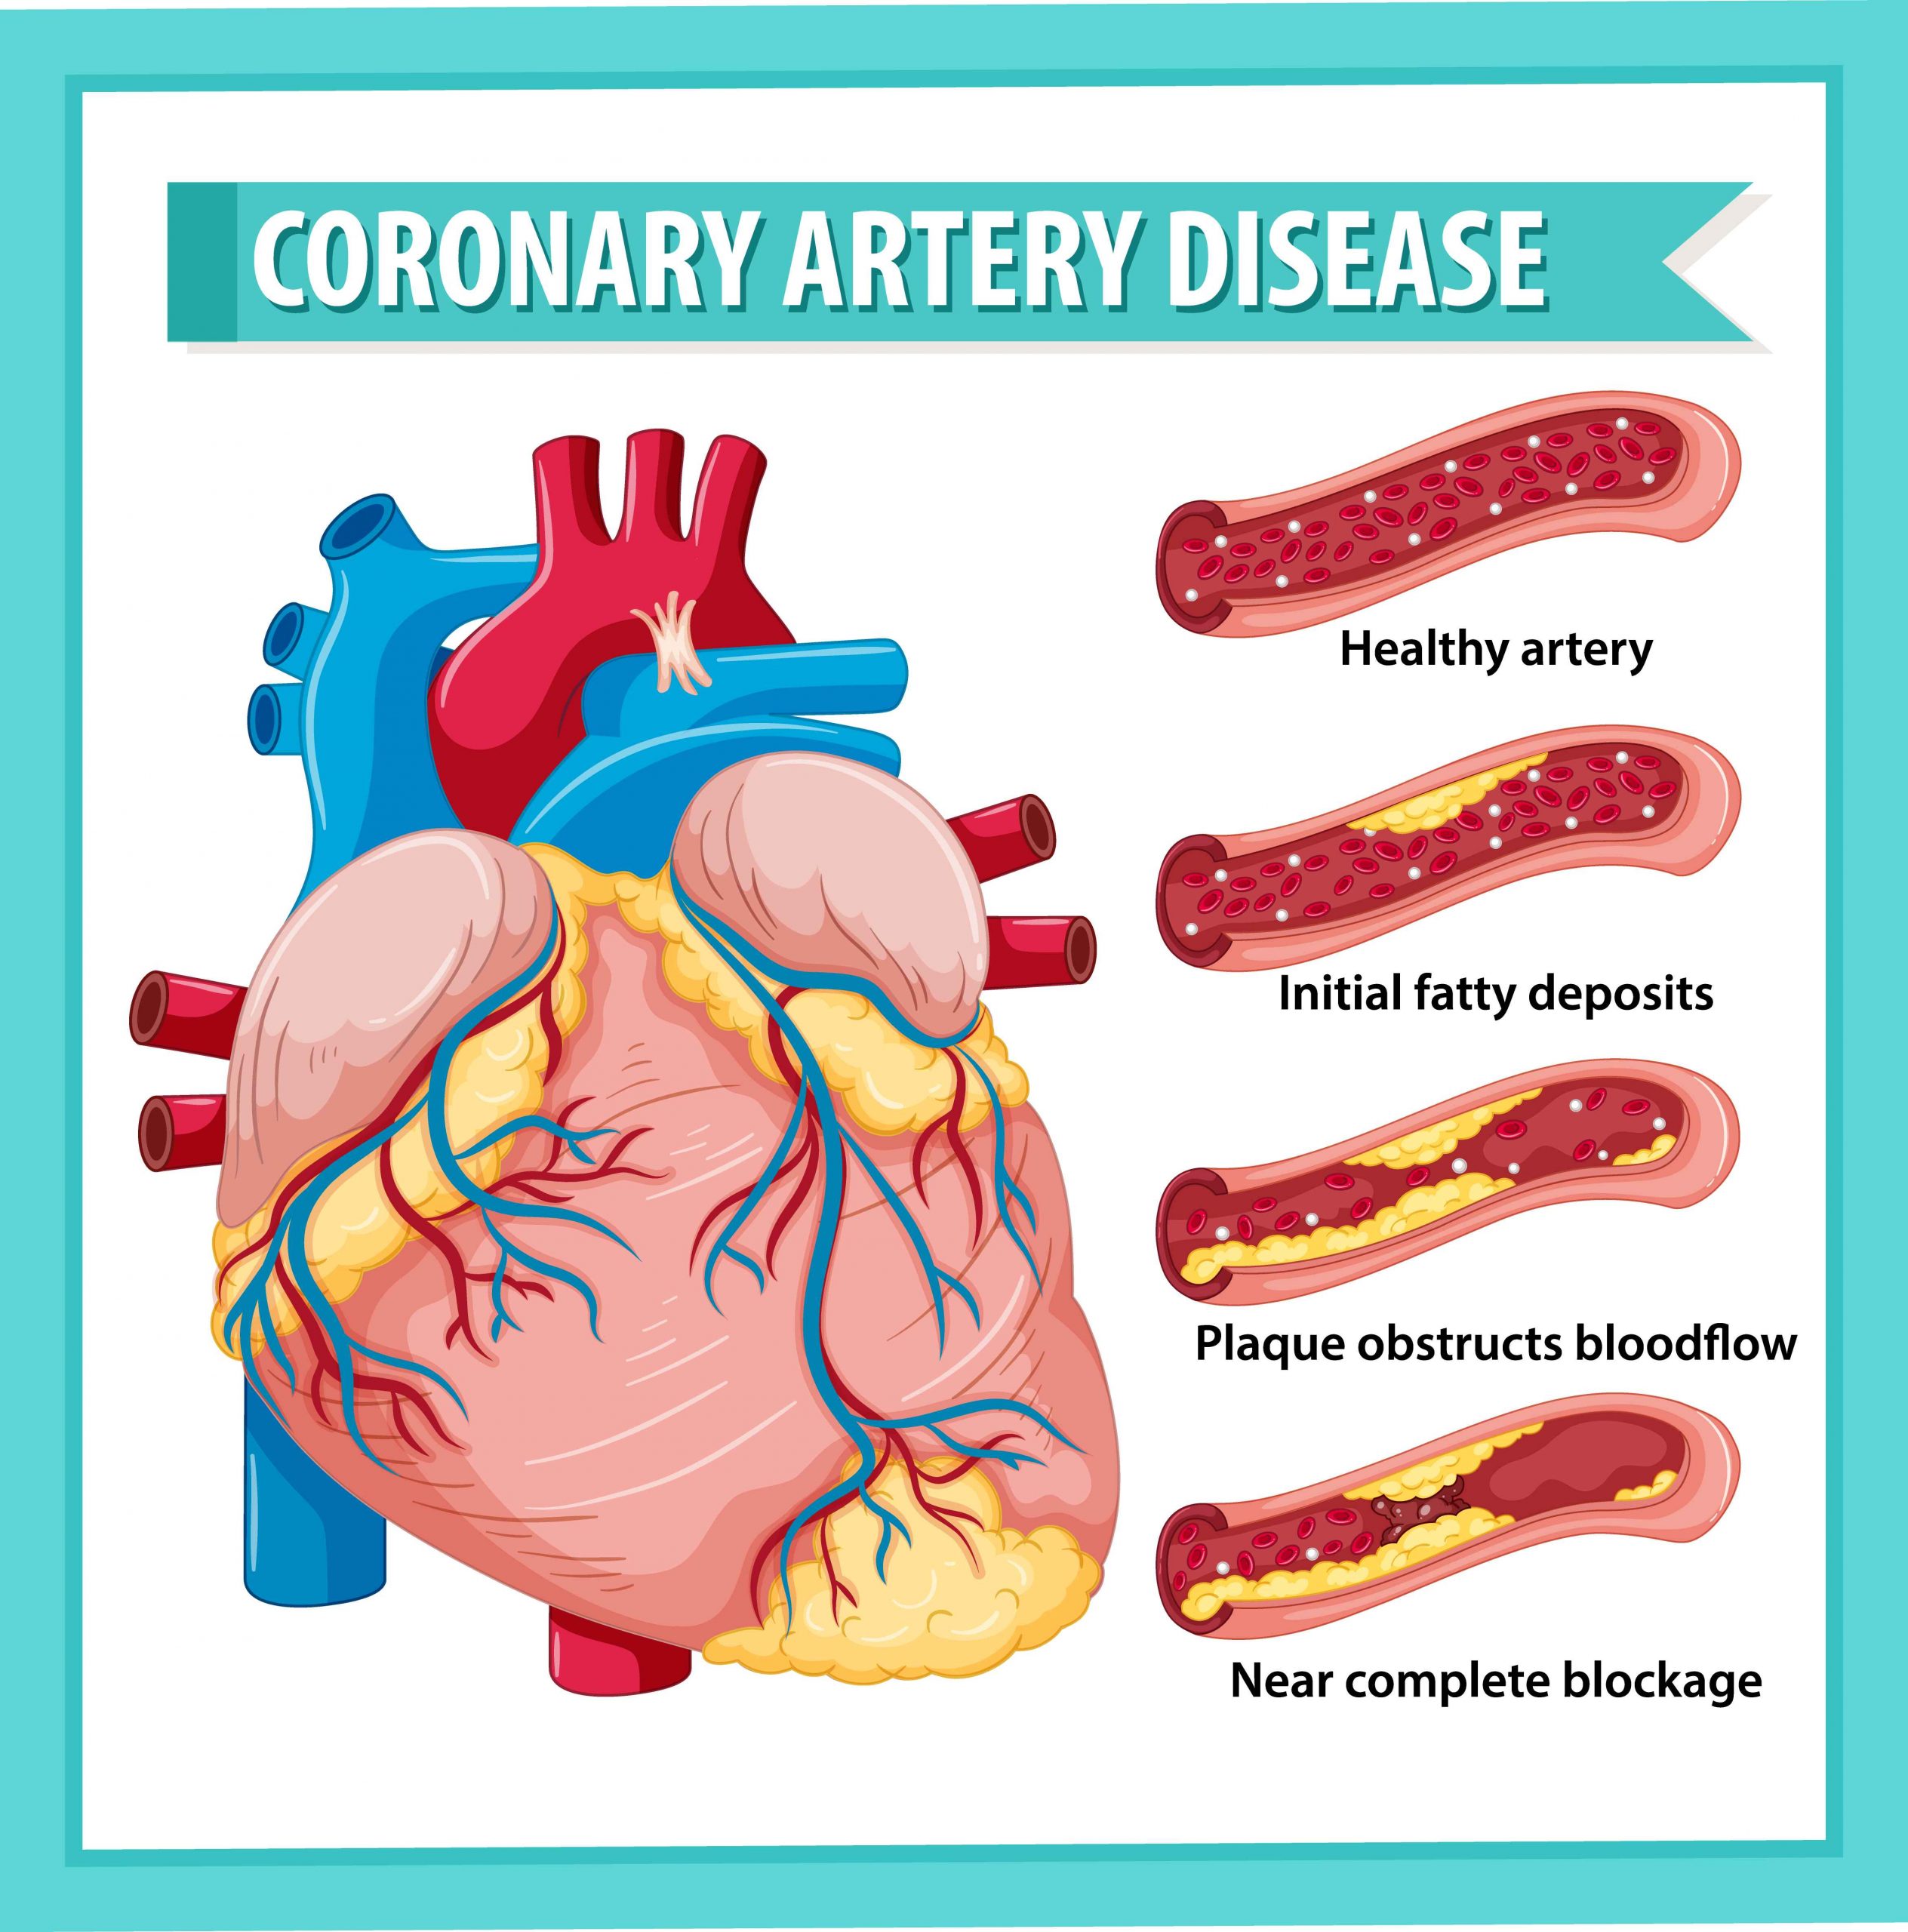 Coronary artery disease: A common heart condition that can be controlled.